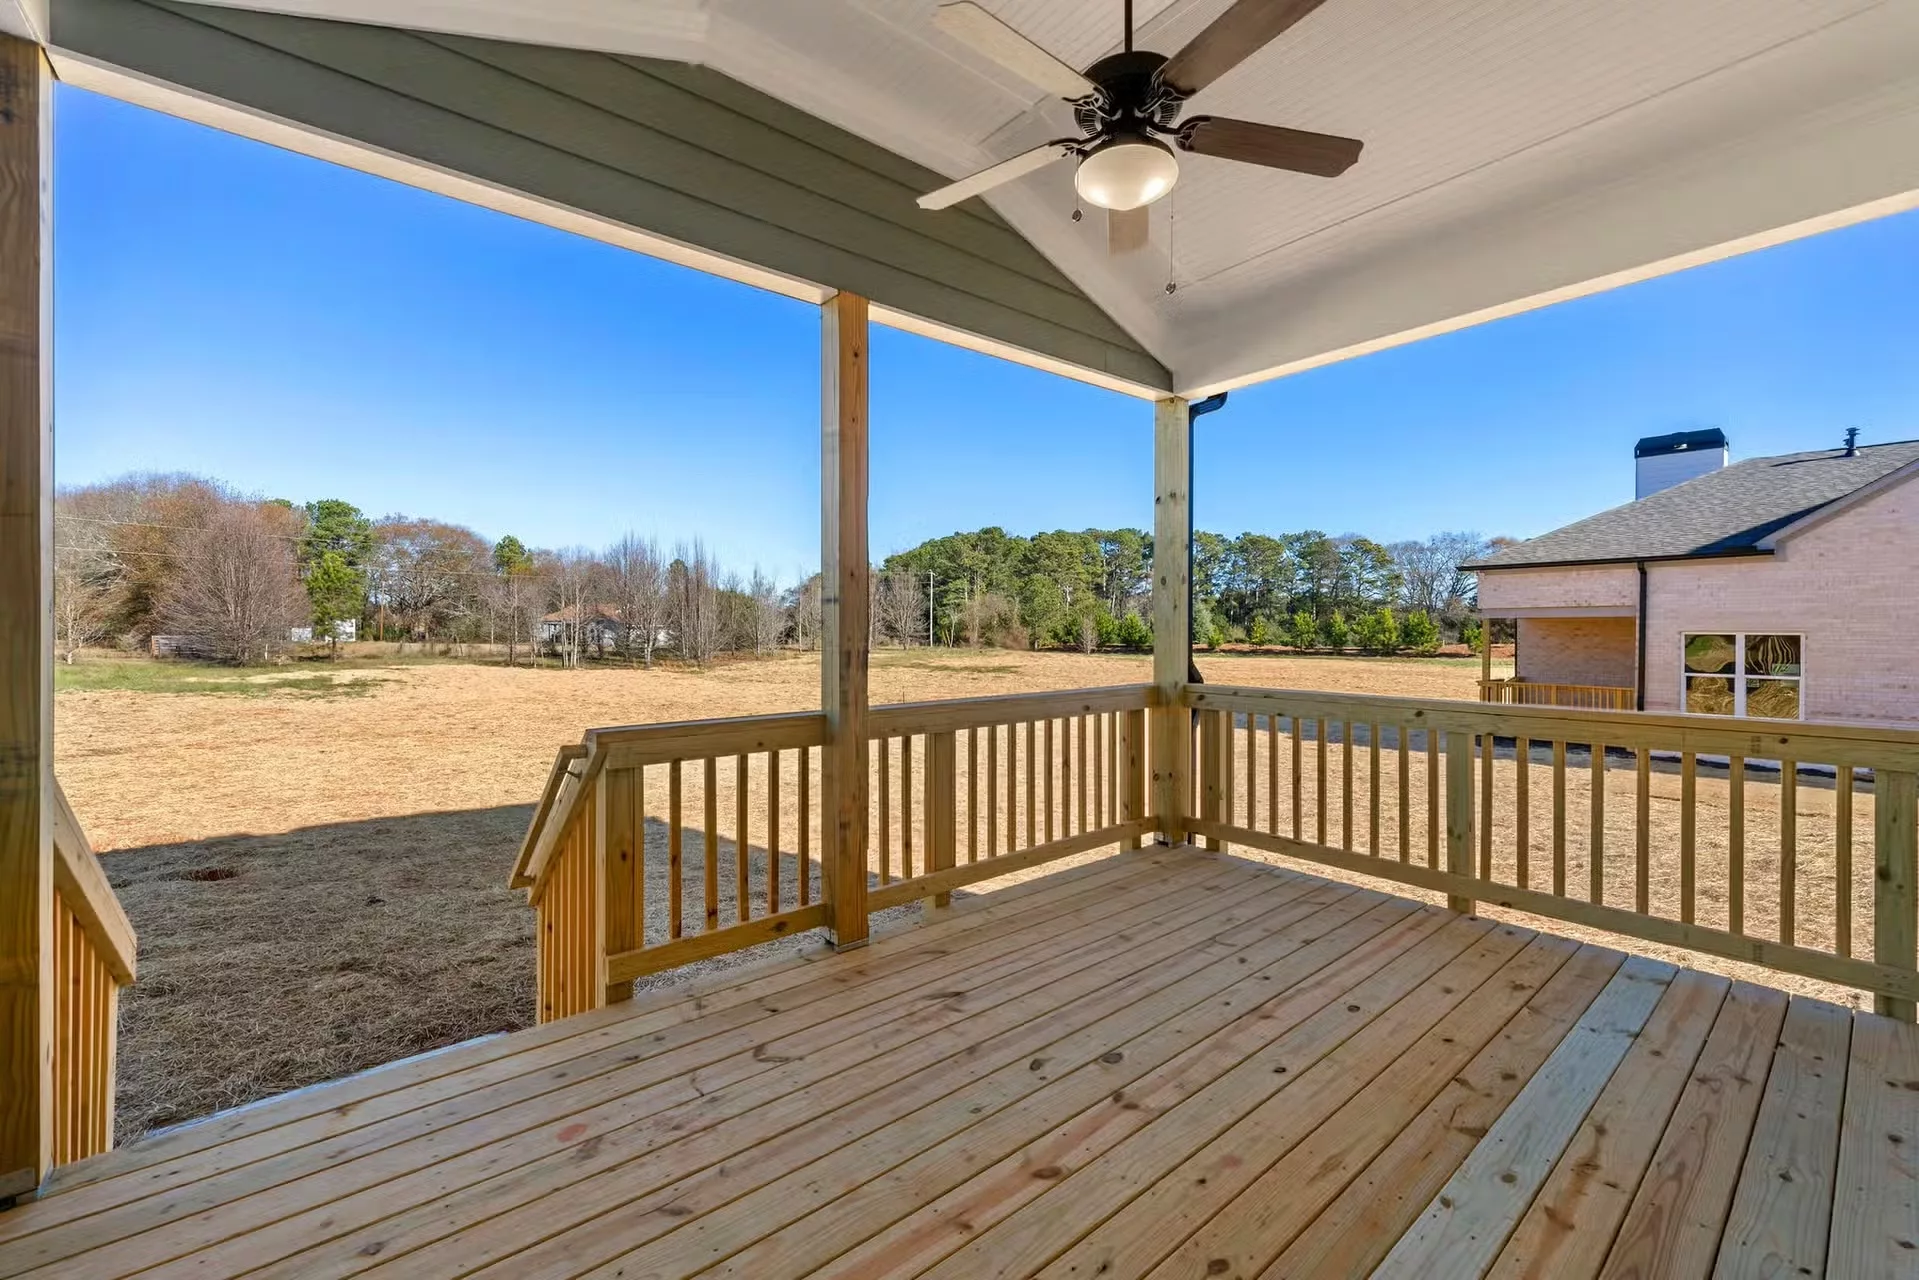 1420 Stonewood Field Rd. Watkinsville, GA | Stonewood Community | Single-Family Home for Sale by SR Homes | Stonewood Community | Single-Family Home for Sale by SR Homes